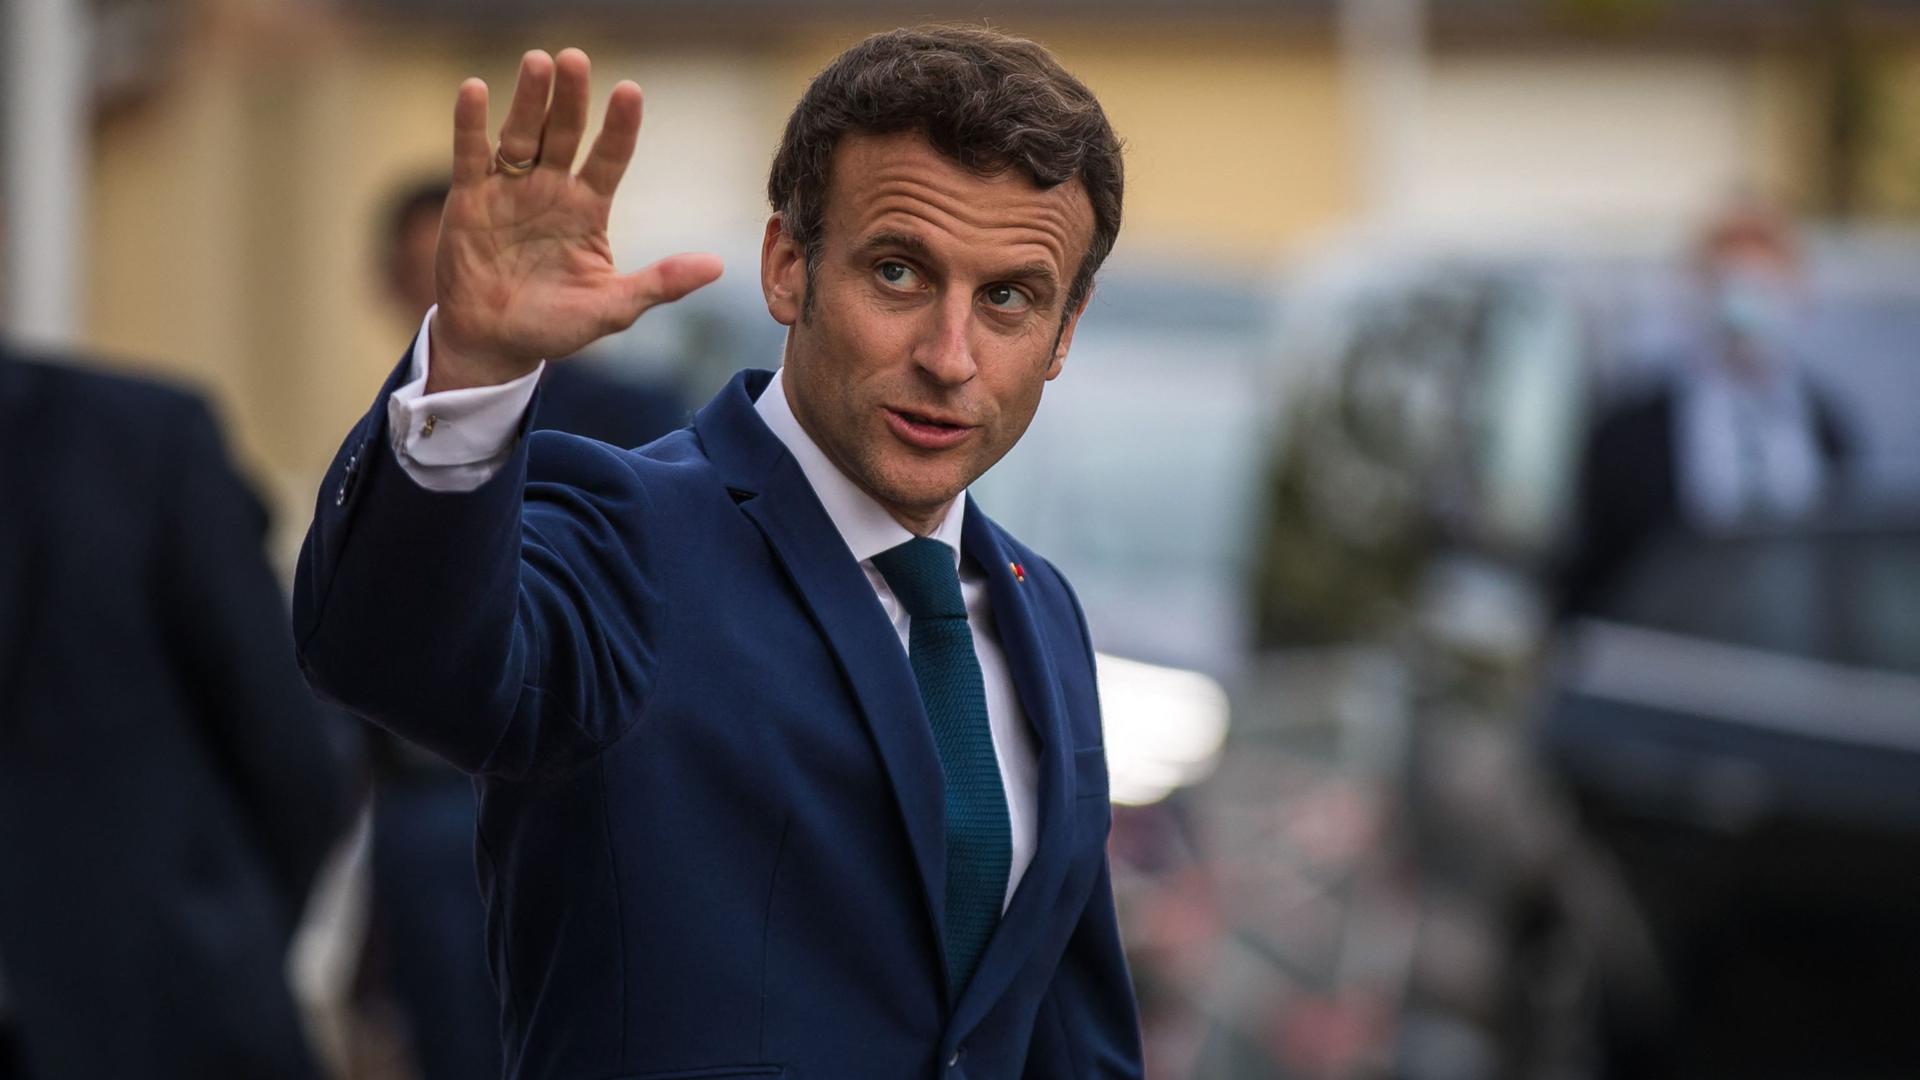 French President Emmanuel Macron gestures a he leaves Percy military hospital after his visit to meet soldiers injured during external operations and caregivers in Clamart, near Paris, France, on April 28, 2022. (Photo by Christophe PETIT TESSON / POOL / AFP)